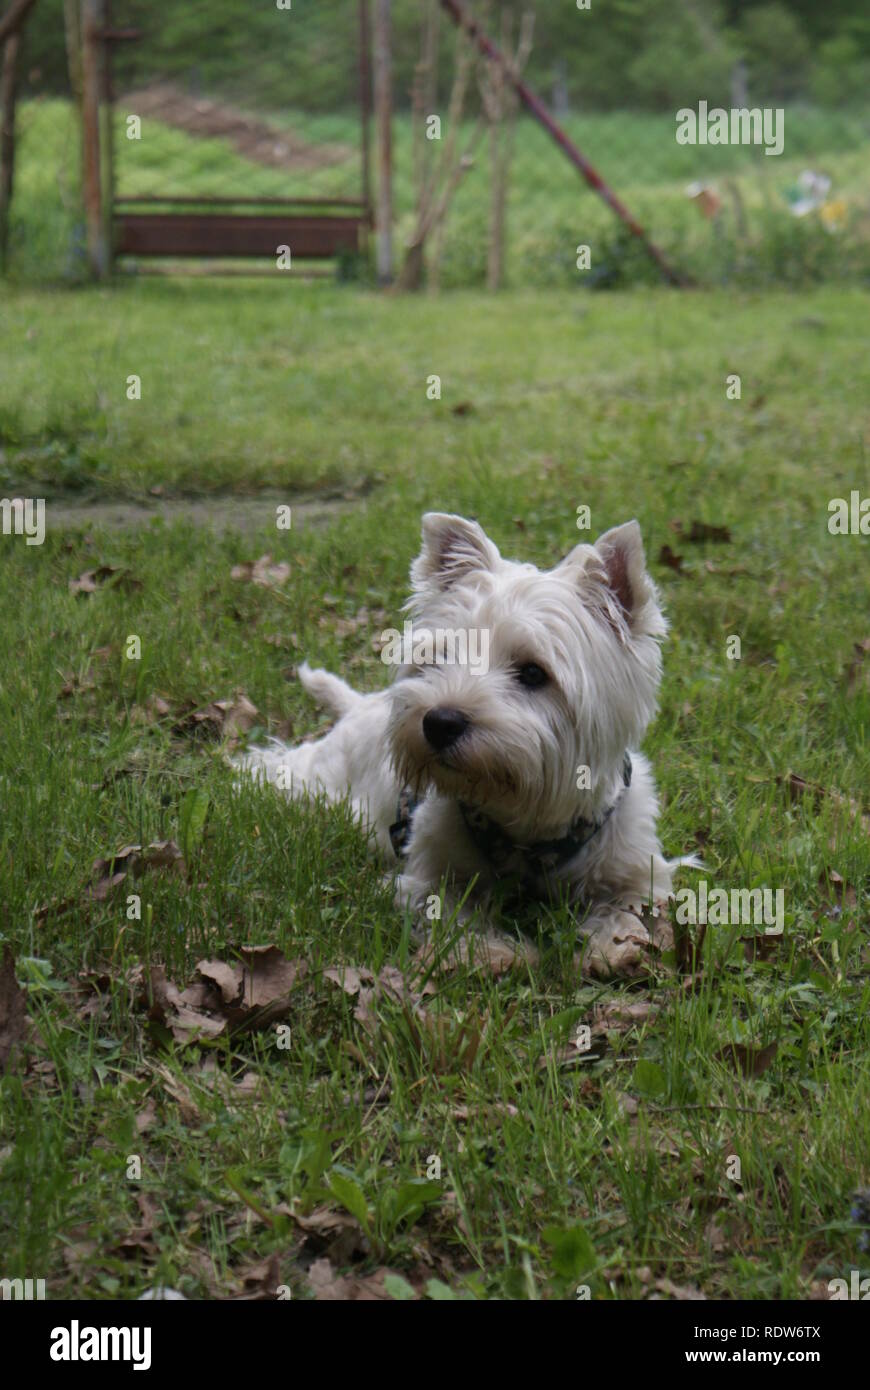 West highland white terrier lying in the grass Stock Photo